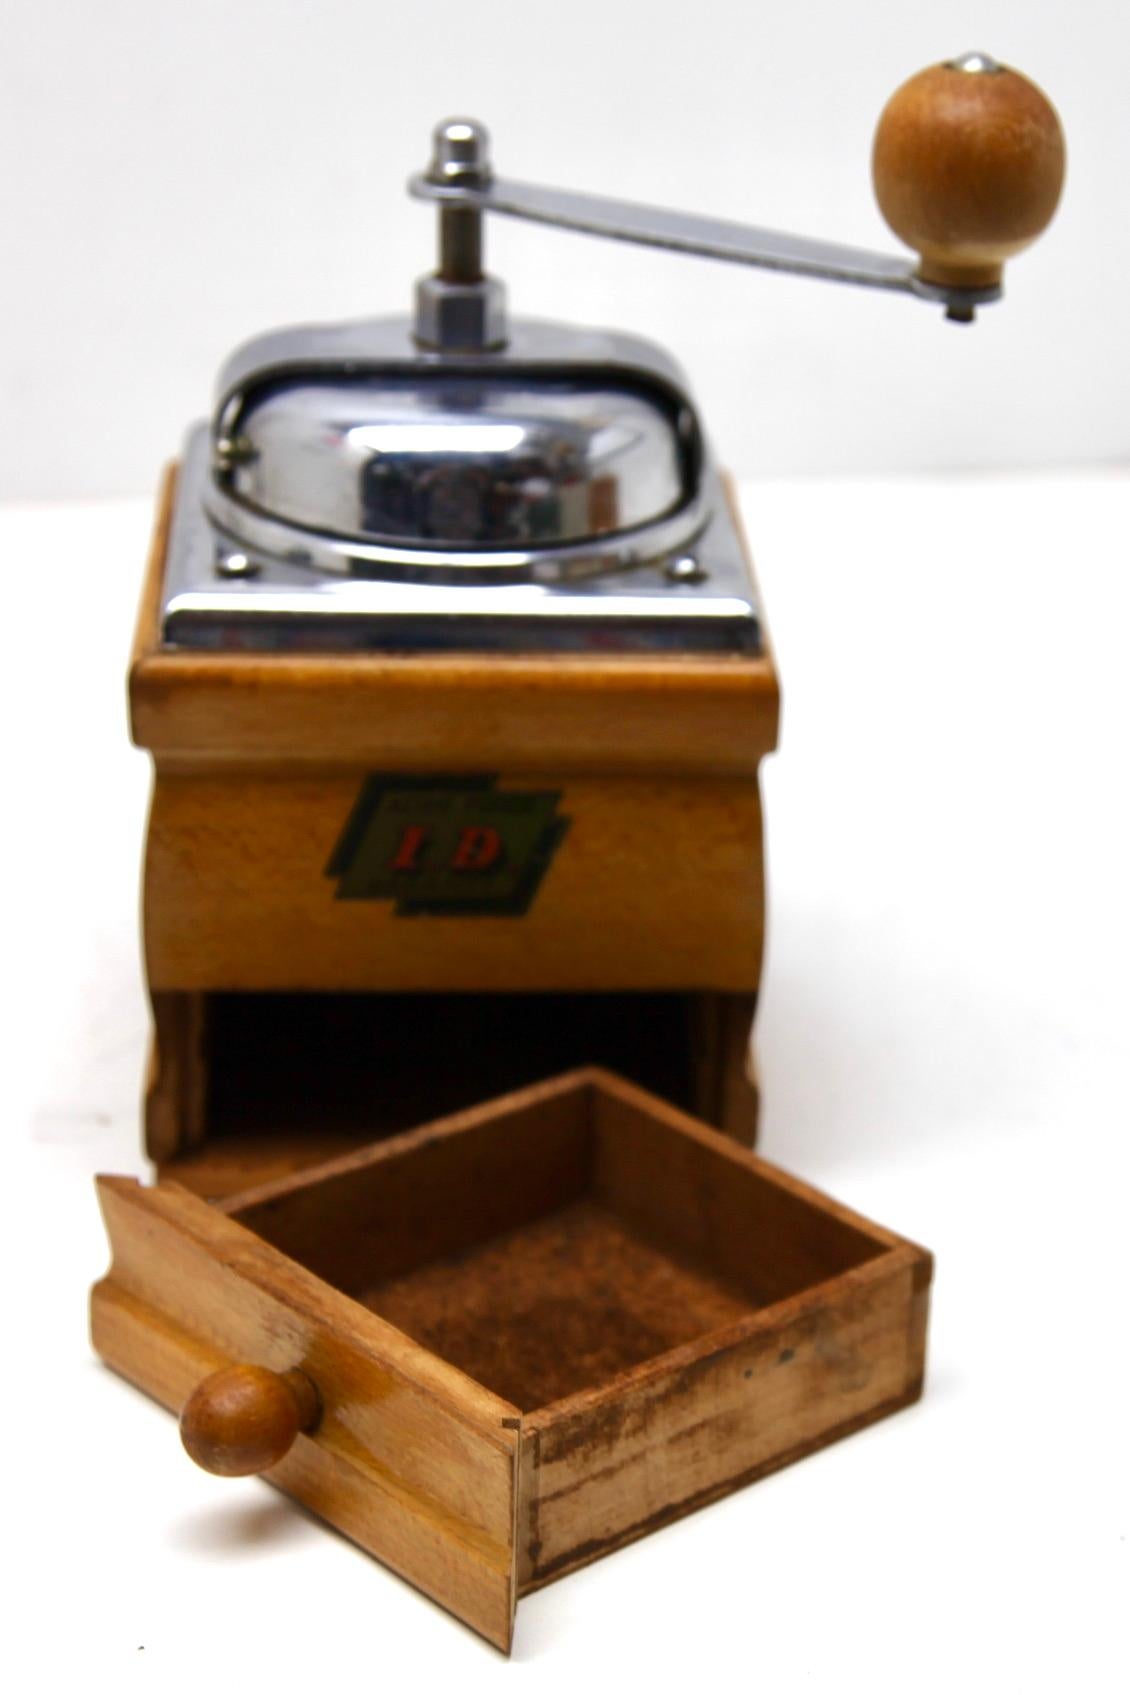 Hand-Crafted Vintage Coffee Grinder I.D. 1940s-1950s Germany, Retro Kitchen For Sale